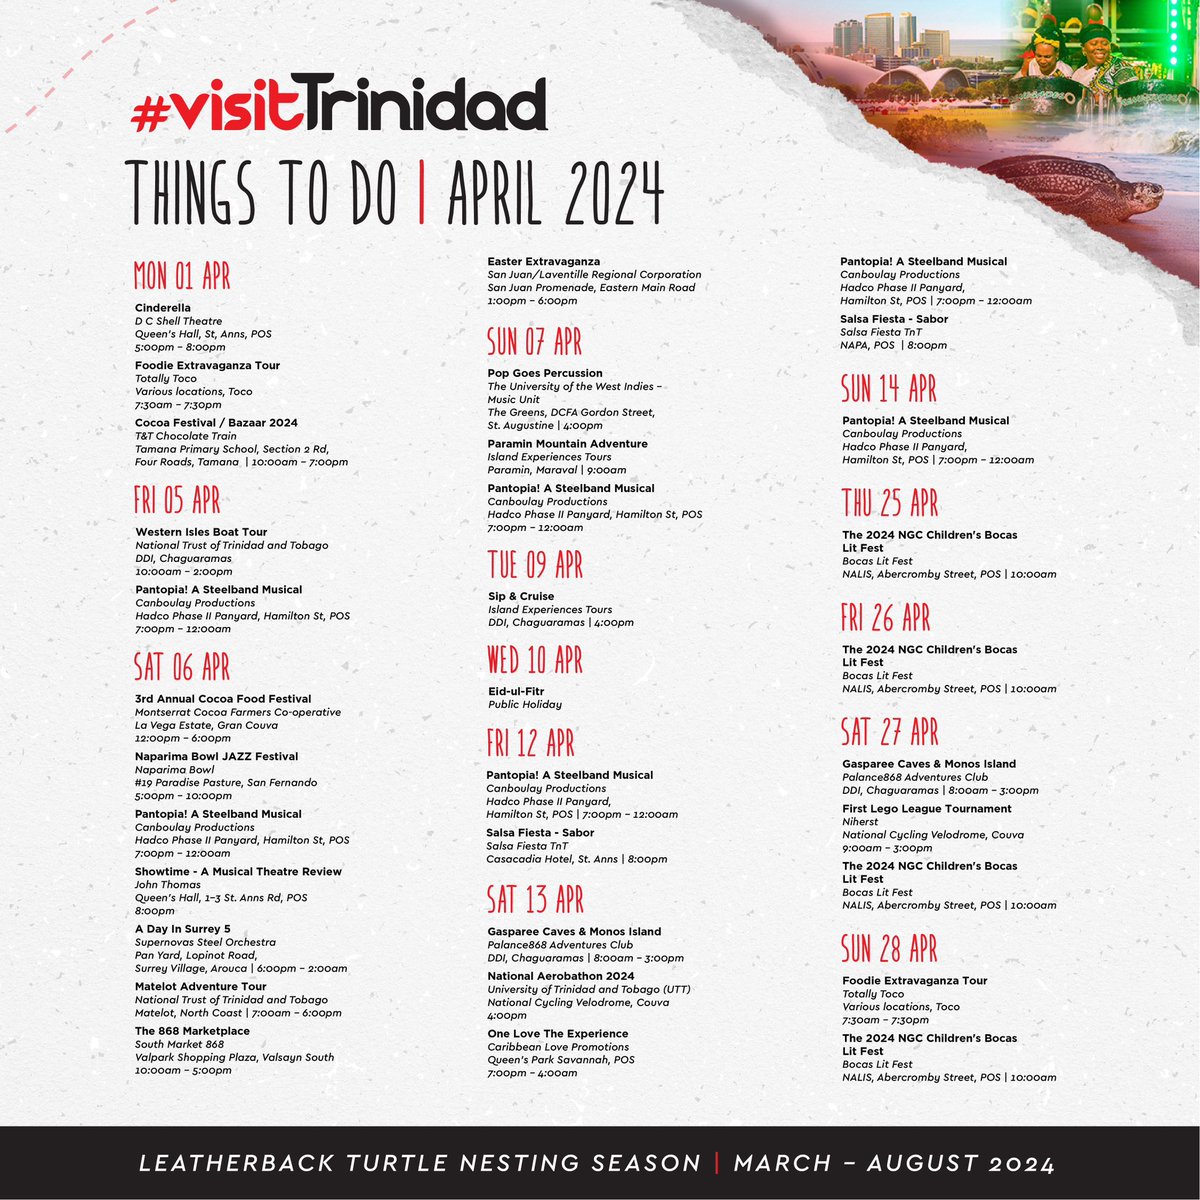 Find something unique to do in Trinidad this month! Here’s a look at our April — Things to Do Calendar. #visitTrinidad